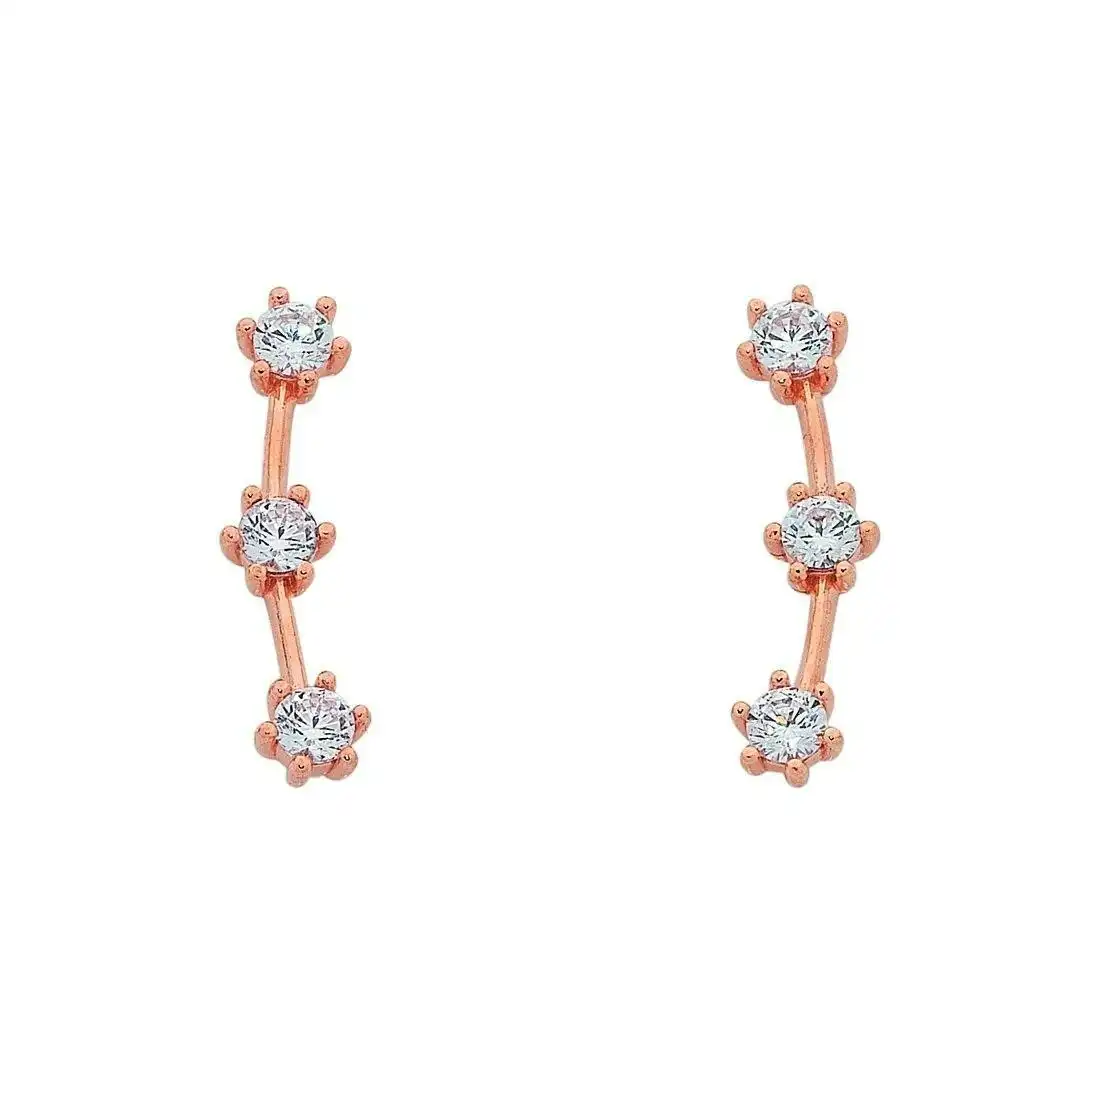 9ct Rose Gold Silver Infused Cubic Zirconia Ear Climbers